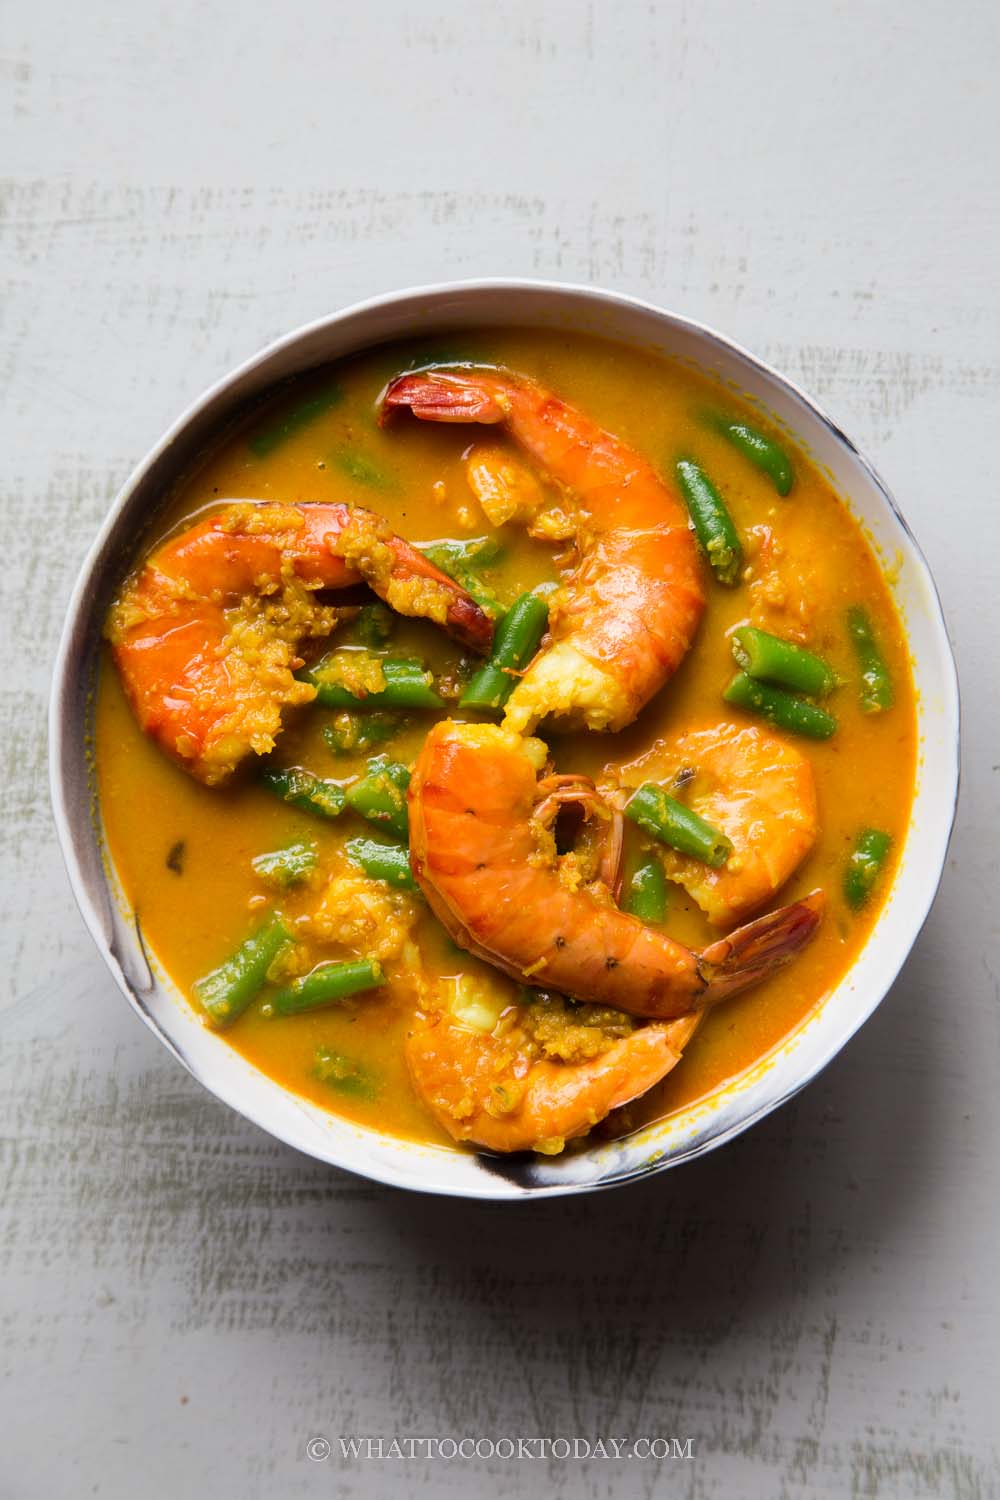 Succulent shrimp are cooked in aromatic coconut milk broth and green beans.